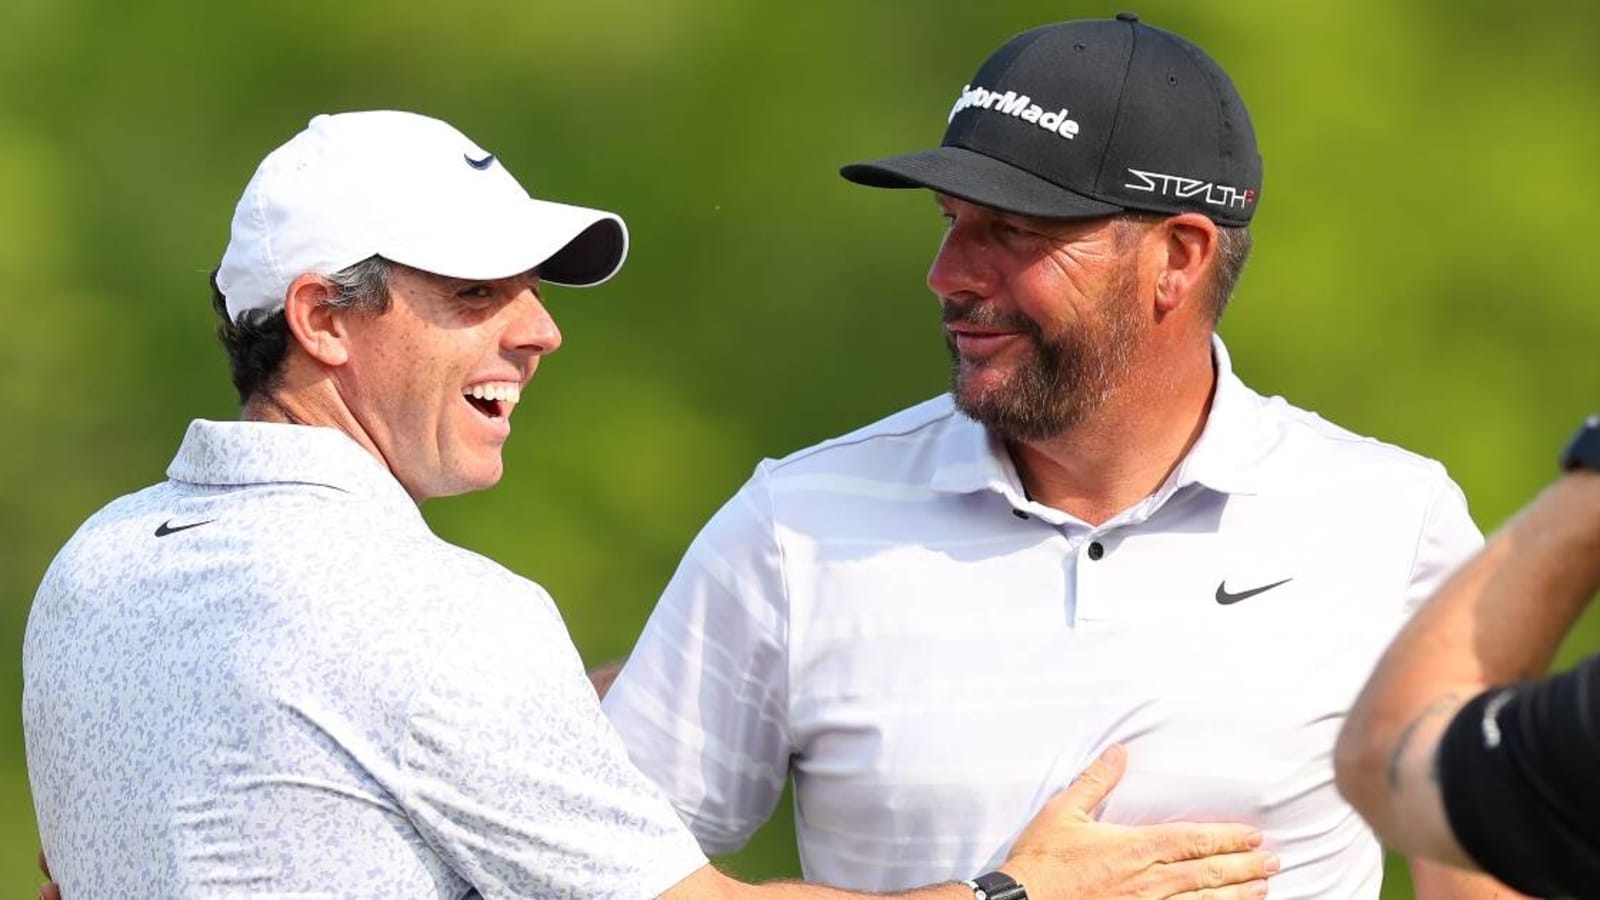 Michael Block clears the air over controversial comments on Rory McIlroy